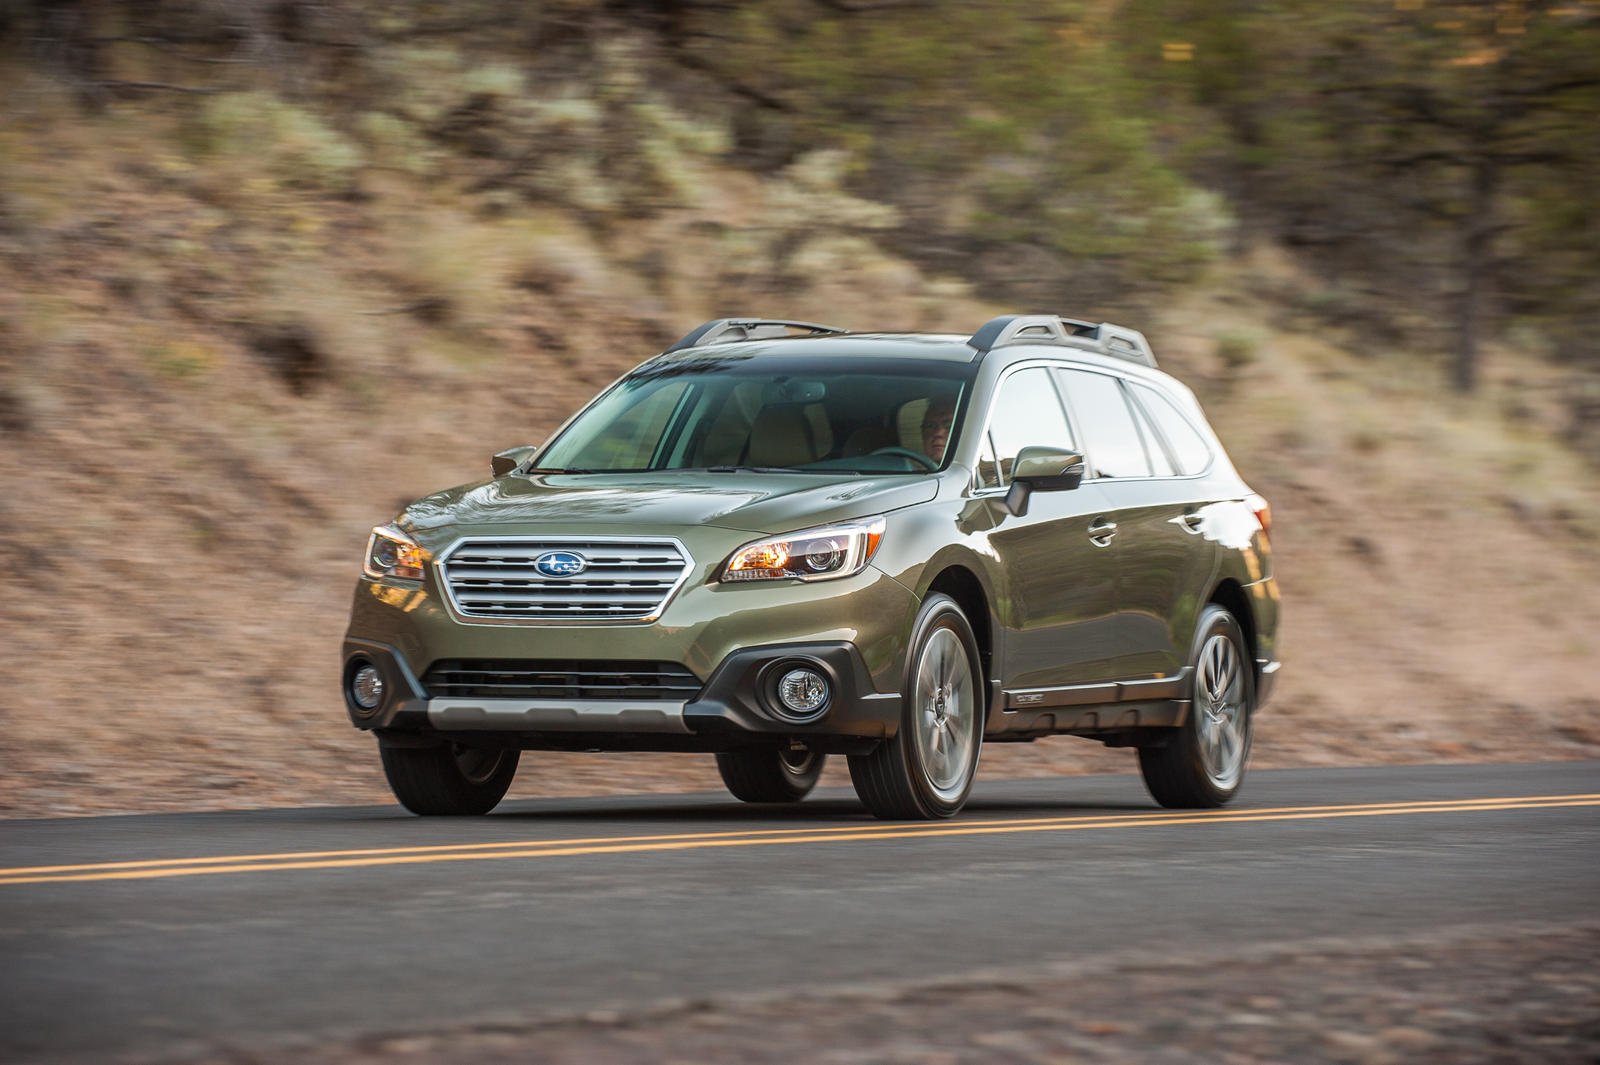 2017 Subaru Outback: Review, Trims, Specs, Price, New Interior Features